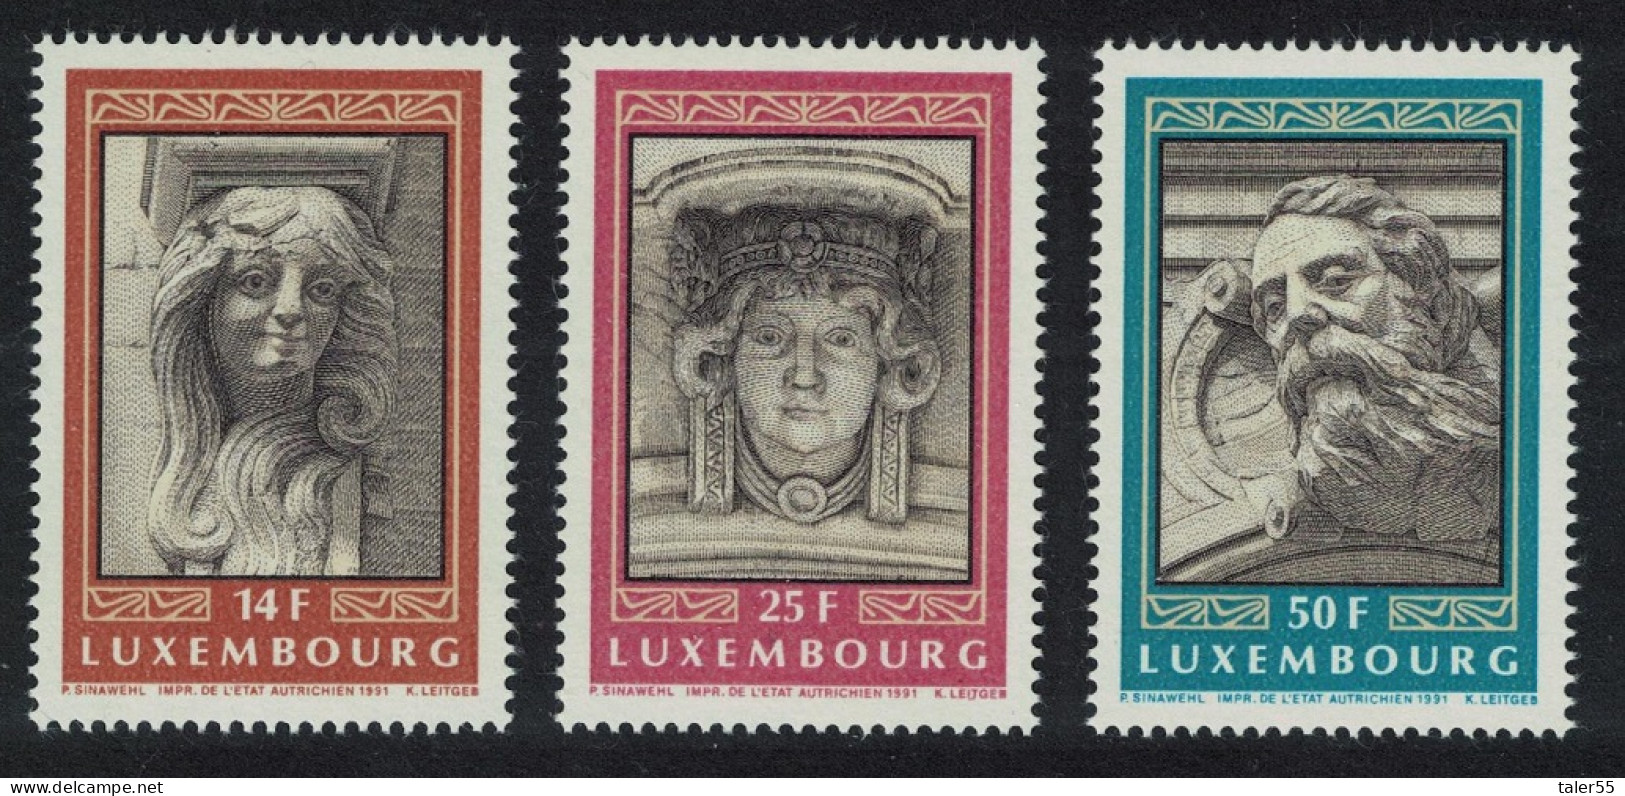 Luxembourg Mascarons Stone Faces On Buildings 3v 1991 MNH SG#1301-1303 MI#1277-1279 - Unused Stamps